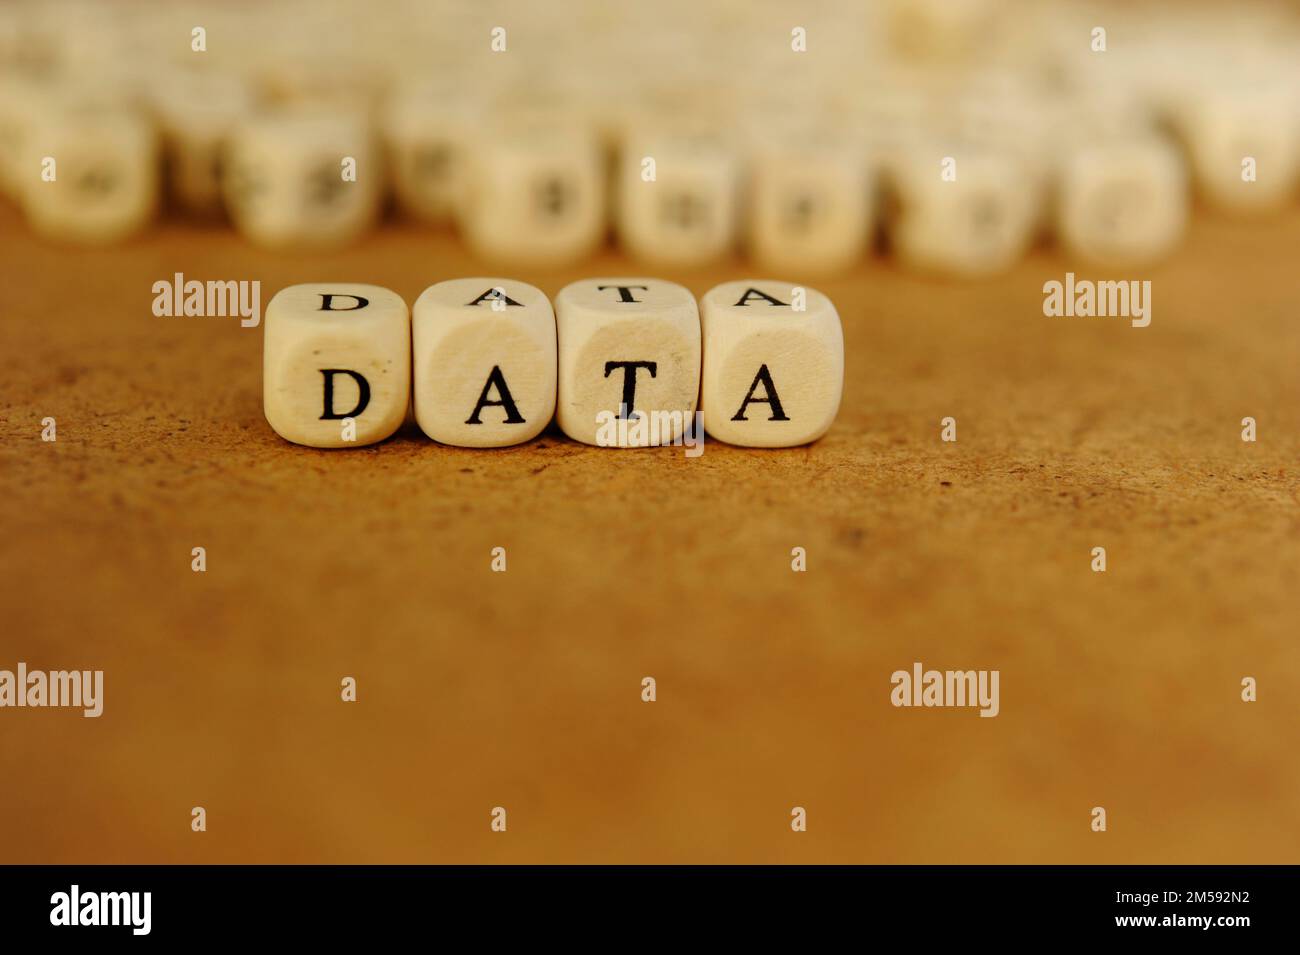 dice with letters forming the word DATA Stock Photo